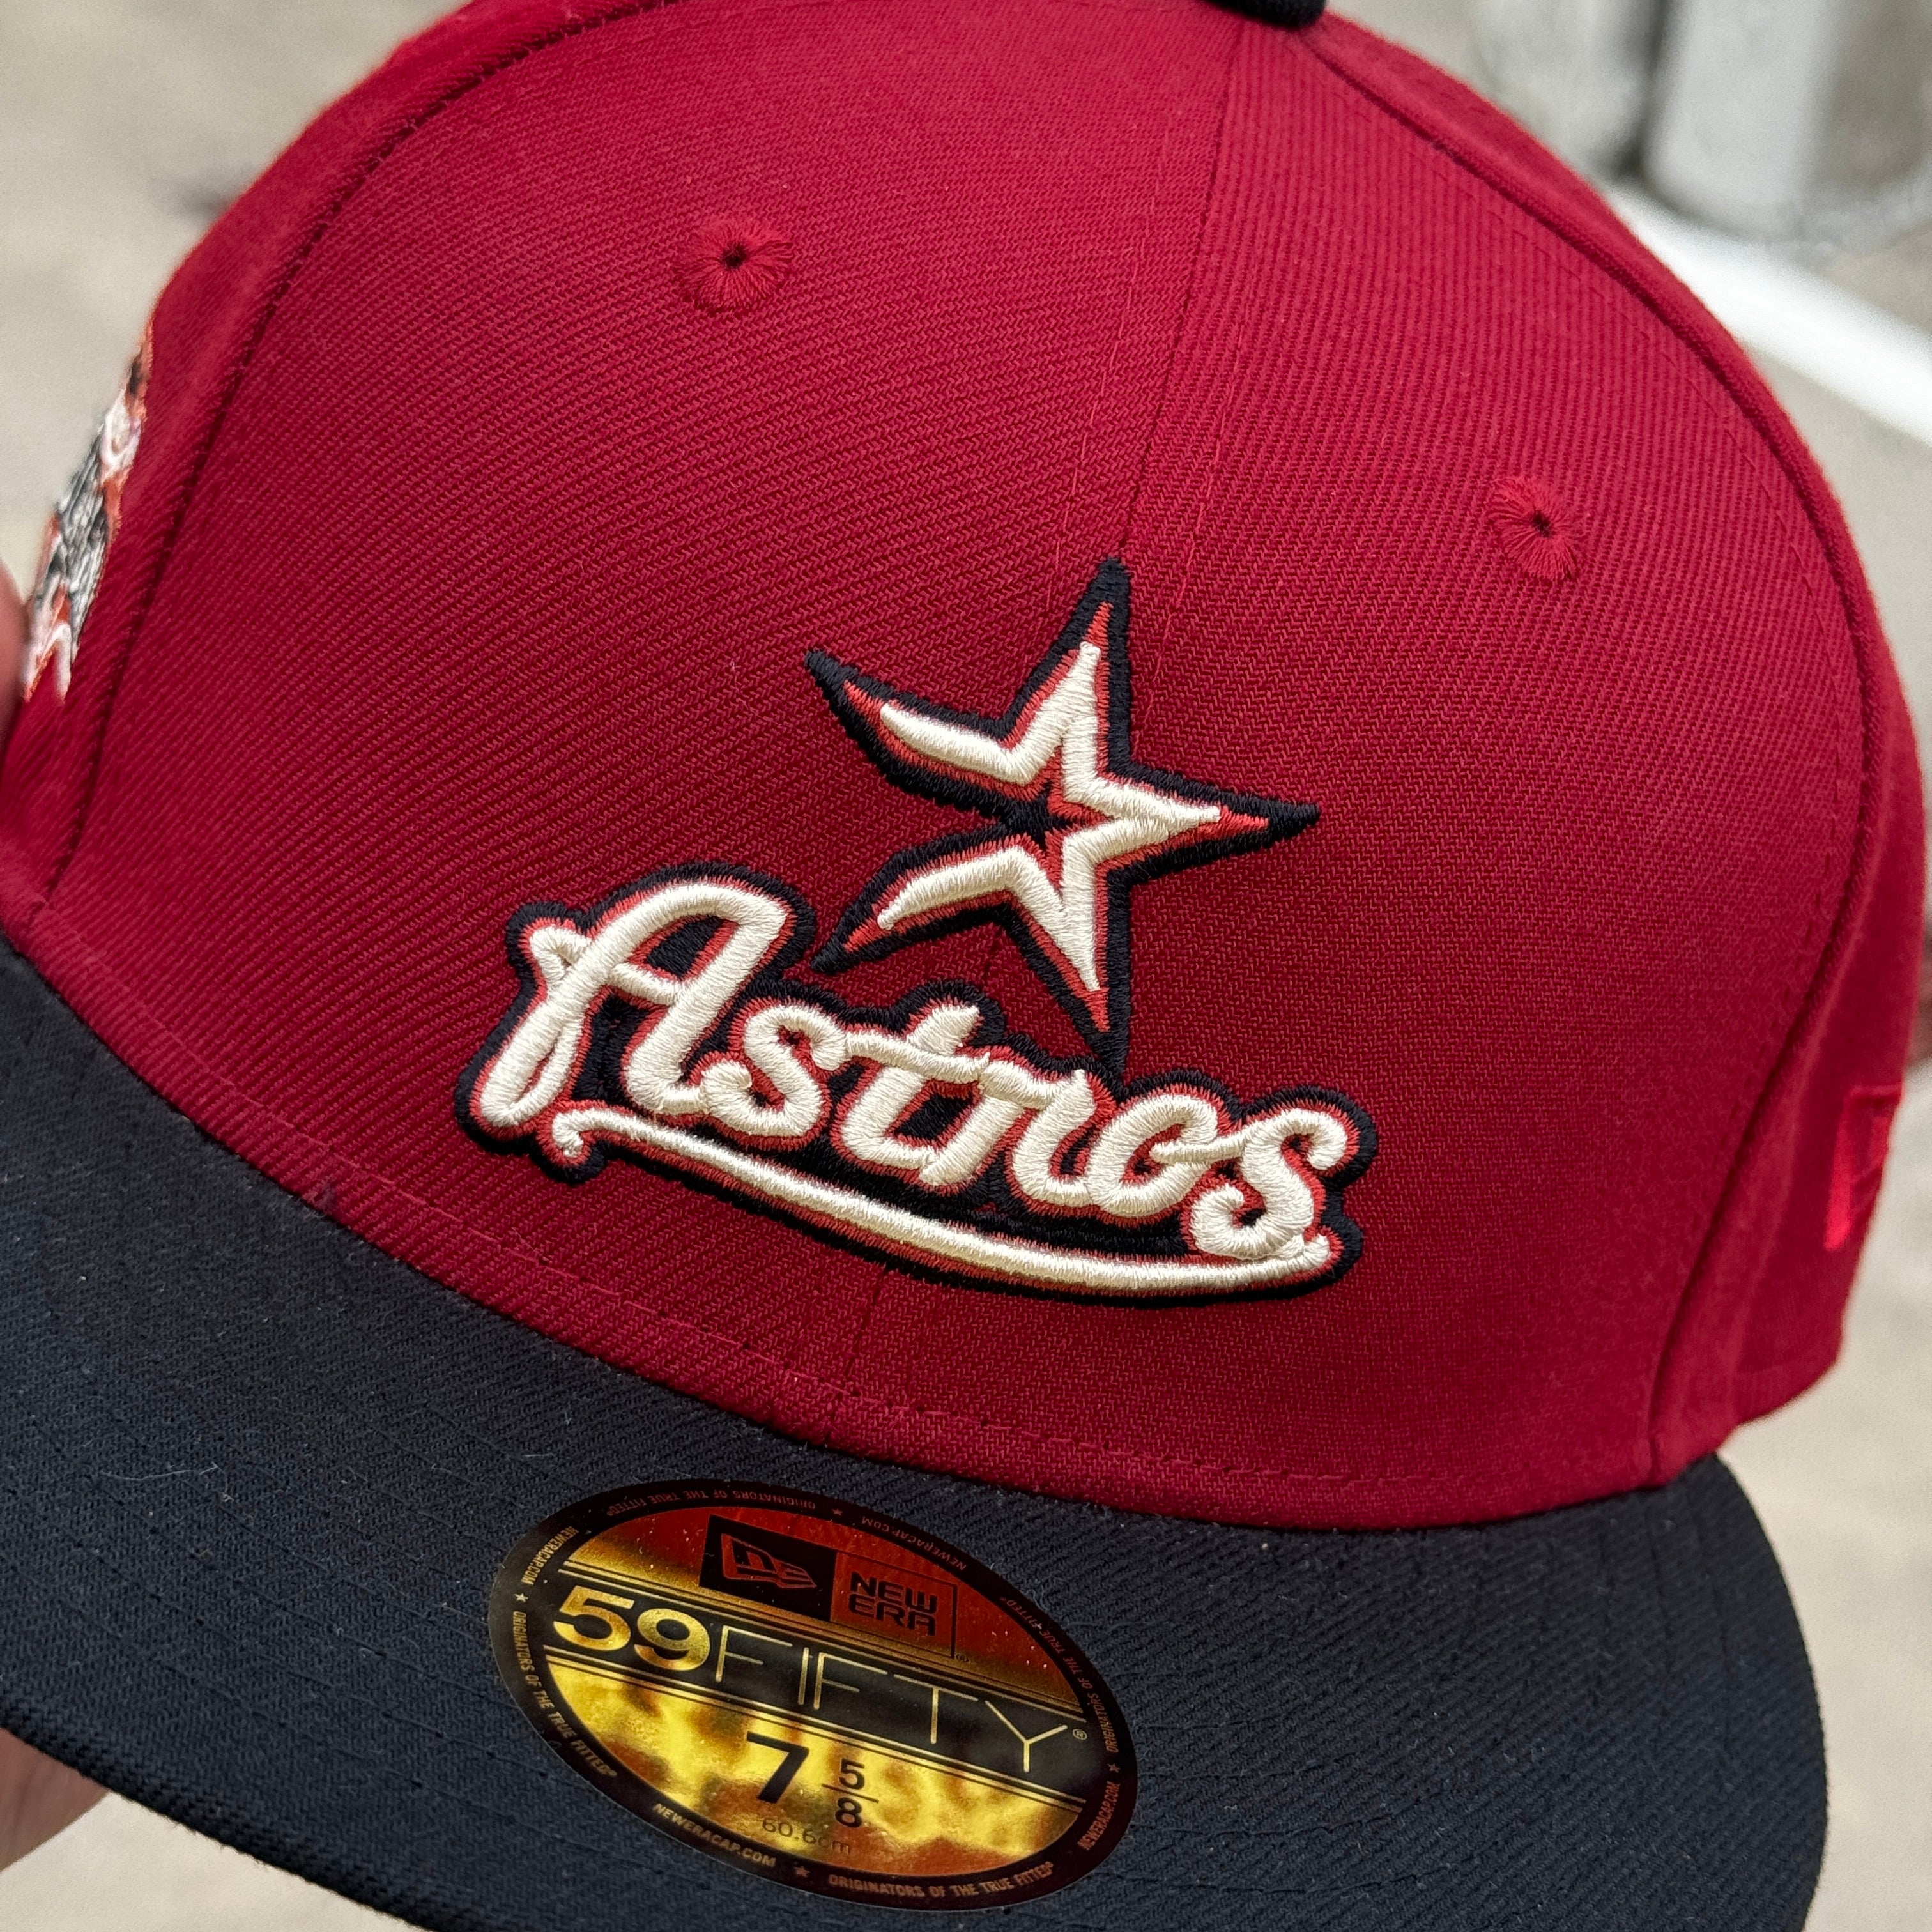 Brick Red Houston Astros Hatclub All Star Game 59fifty New Era Fitted Cap Hat